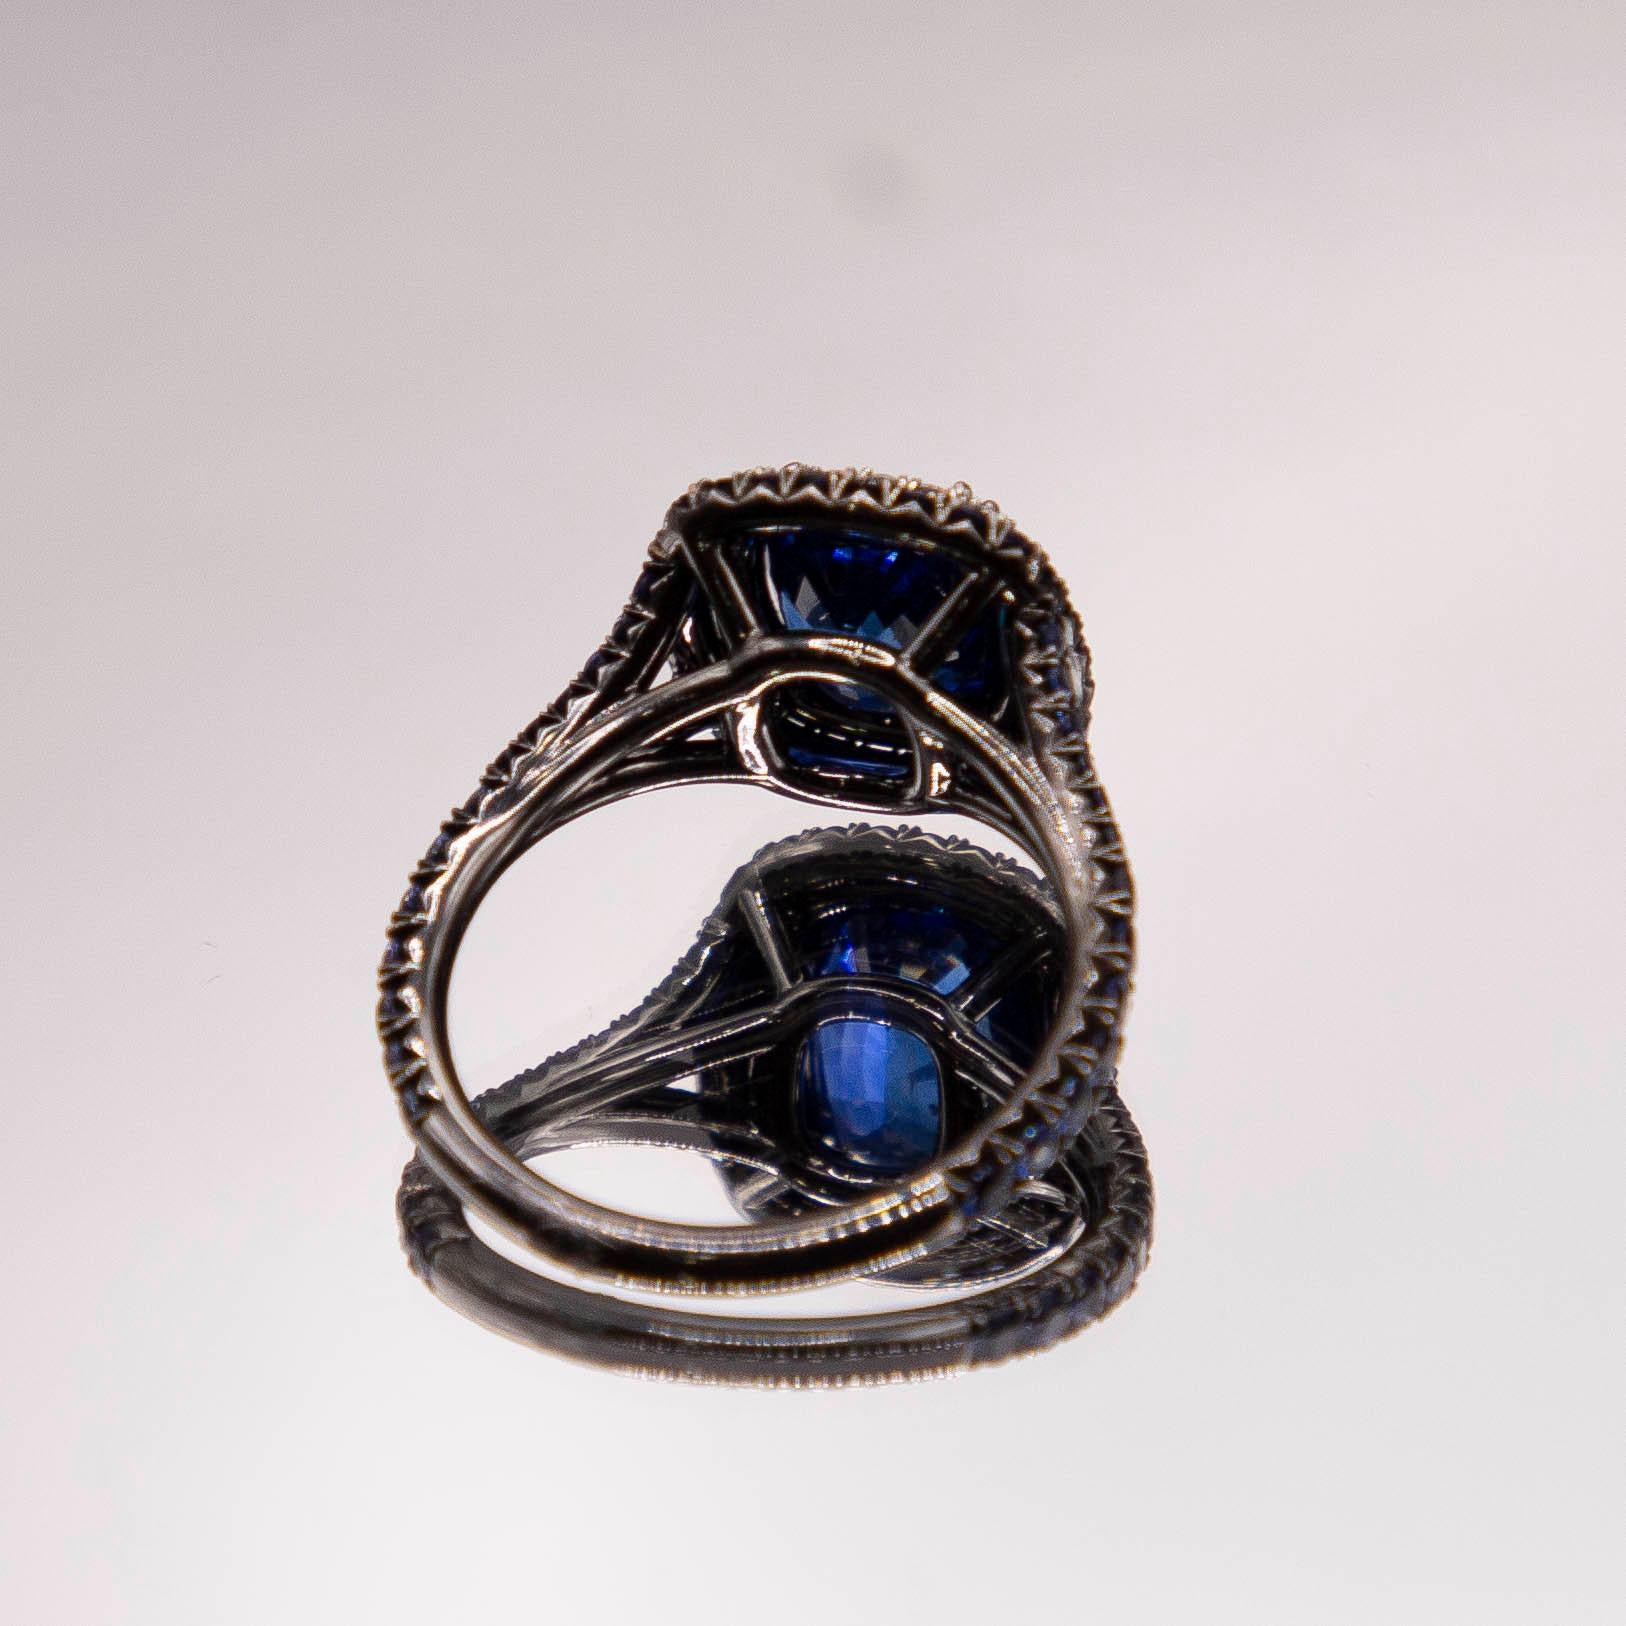 A vivid blue 2.77 carats Ceylon Sapphire of incomparable color, radiates in talon prongs, framed in a halo encrusted with virtually flawless E color diamonds. A slightly recessed secondary halo contains equally spectacular blue round sapphires,